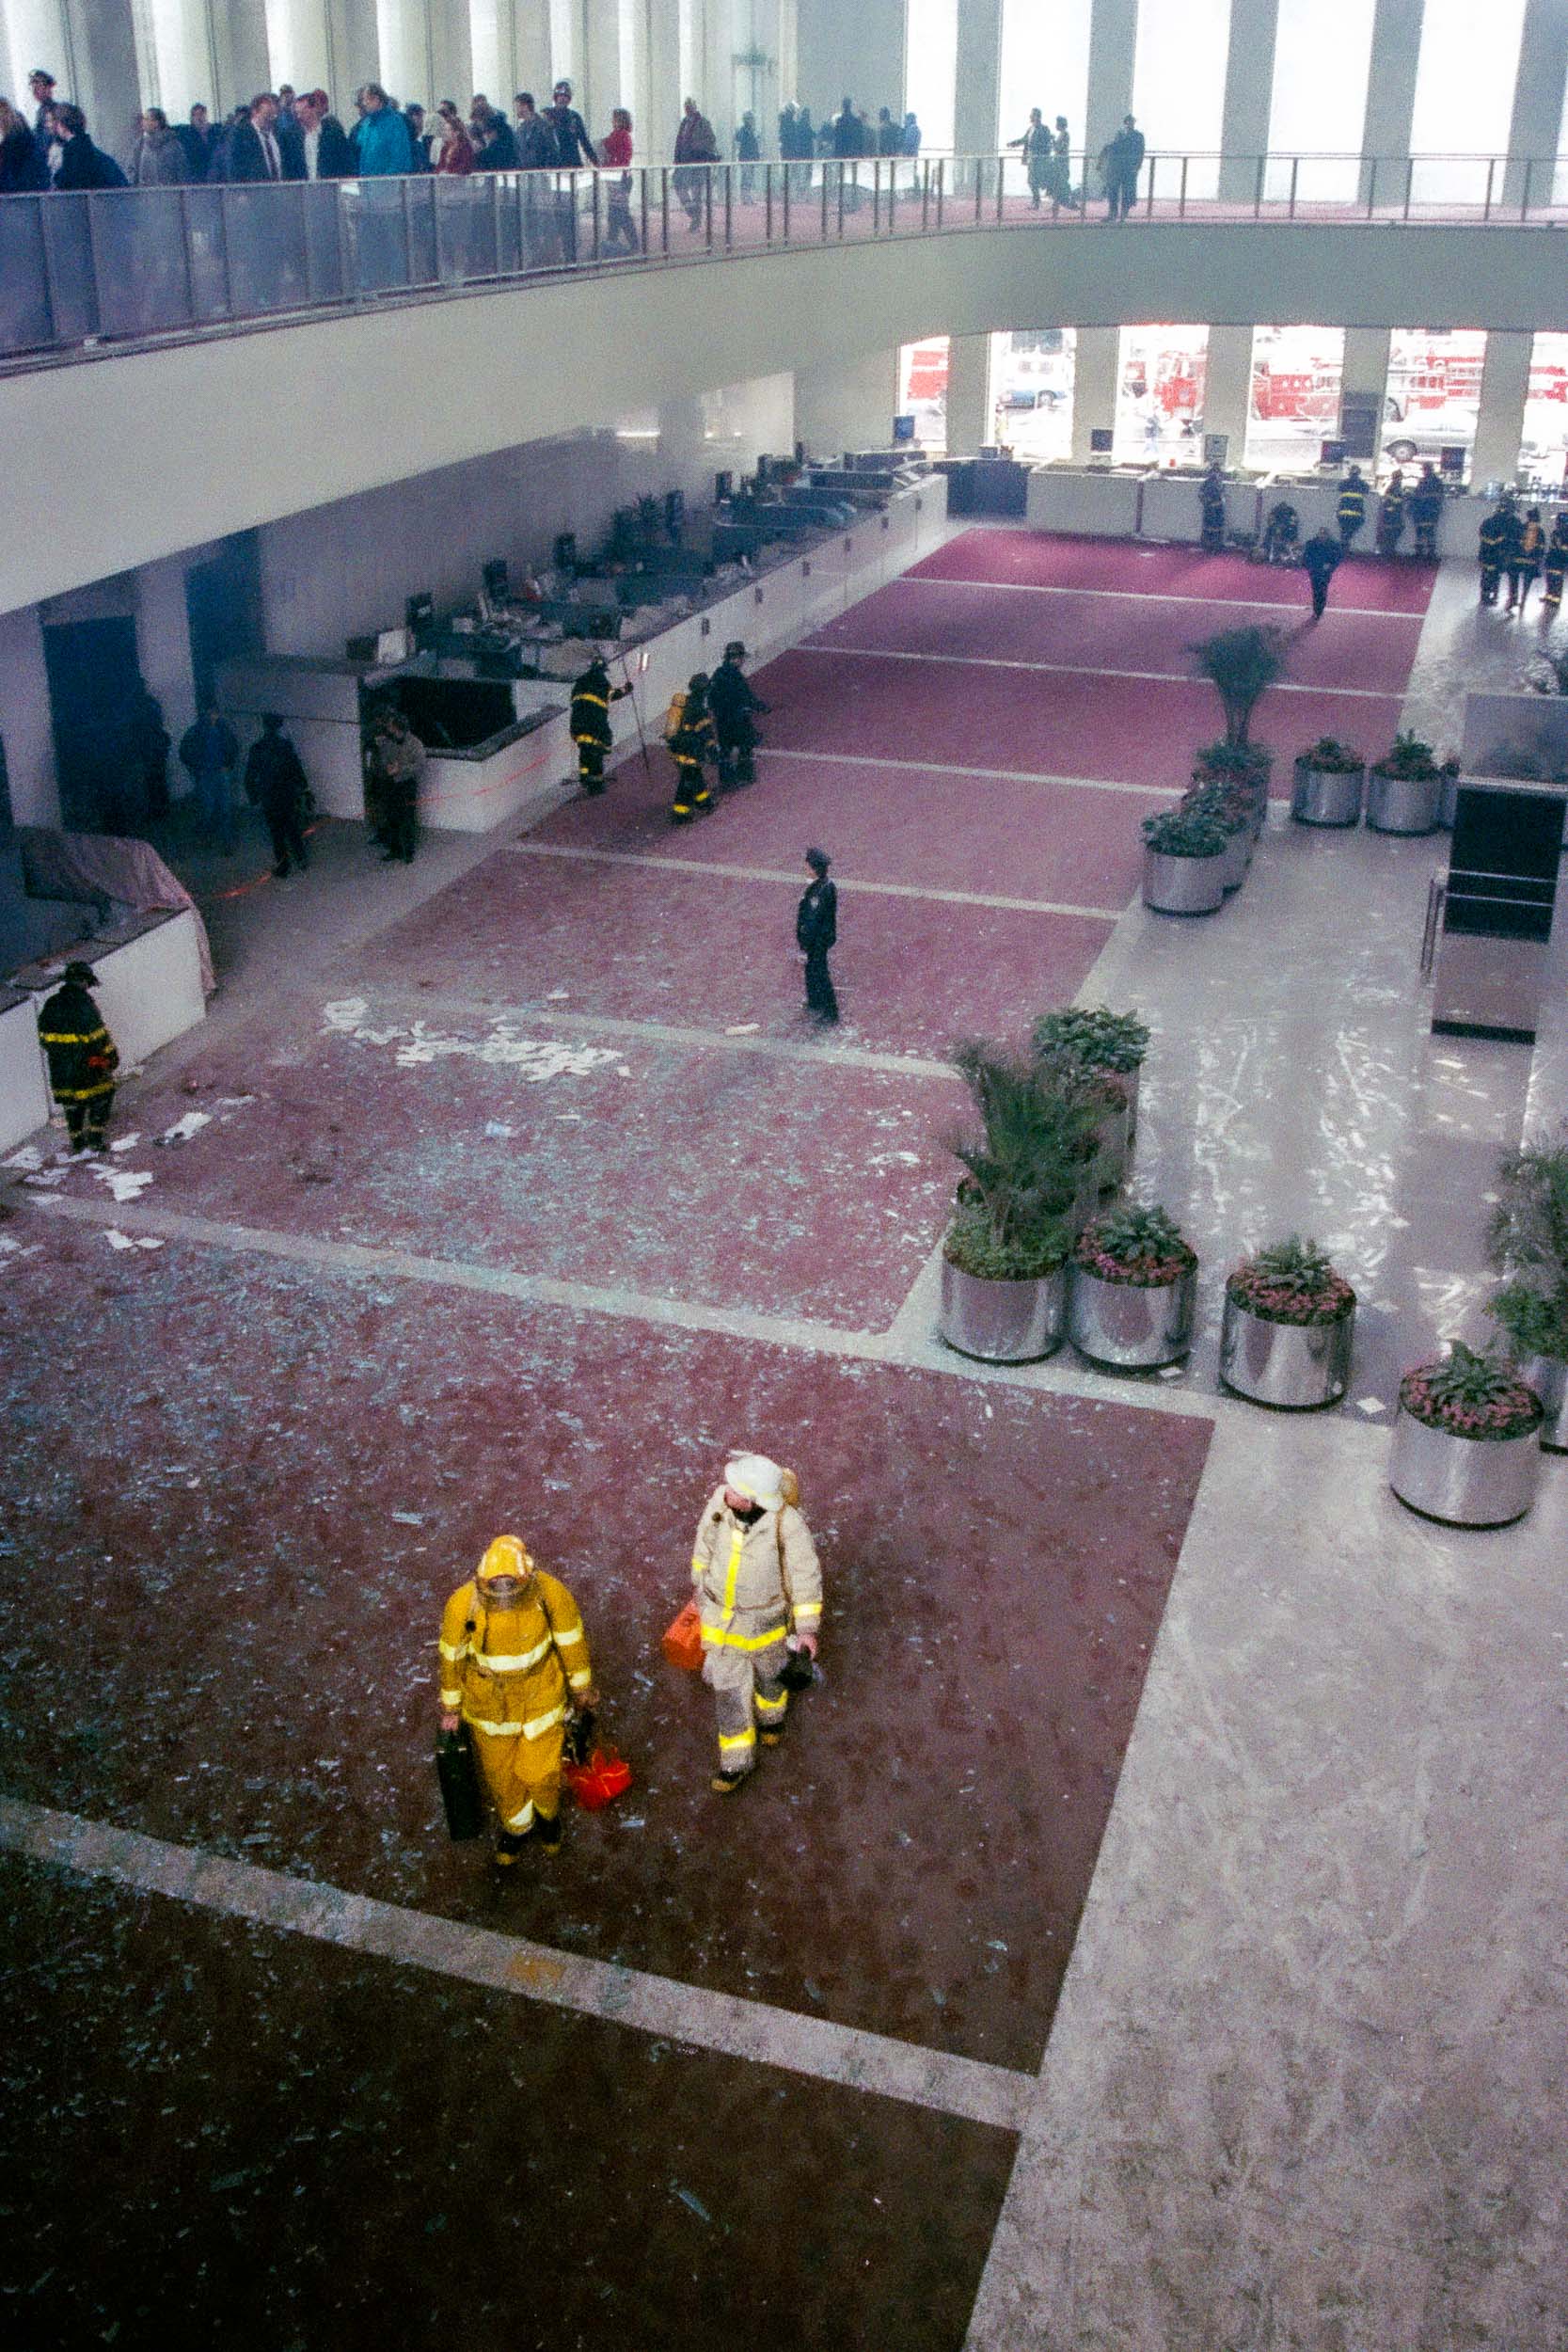 Office workers in the upper lobby and firemen in the lower lobby of the World Trade Center, NY, 1993